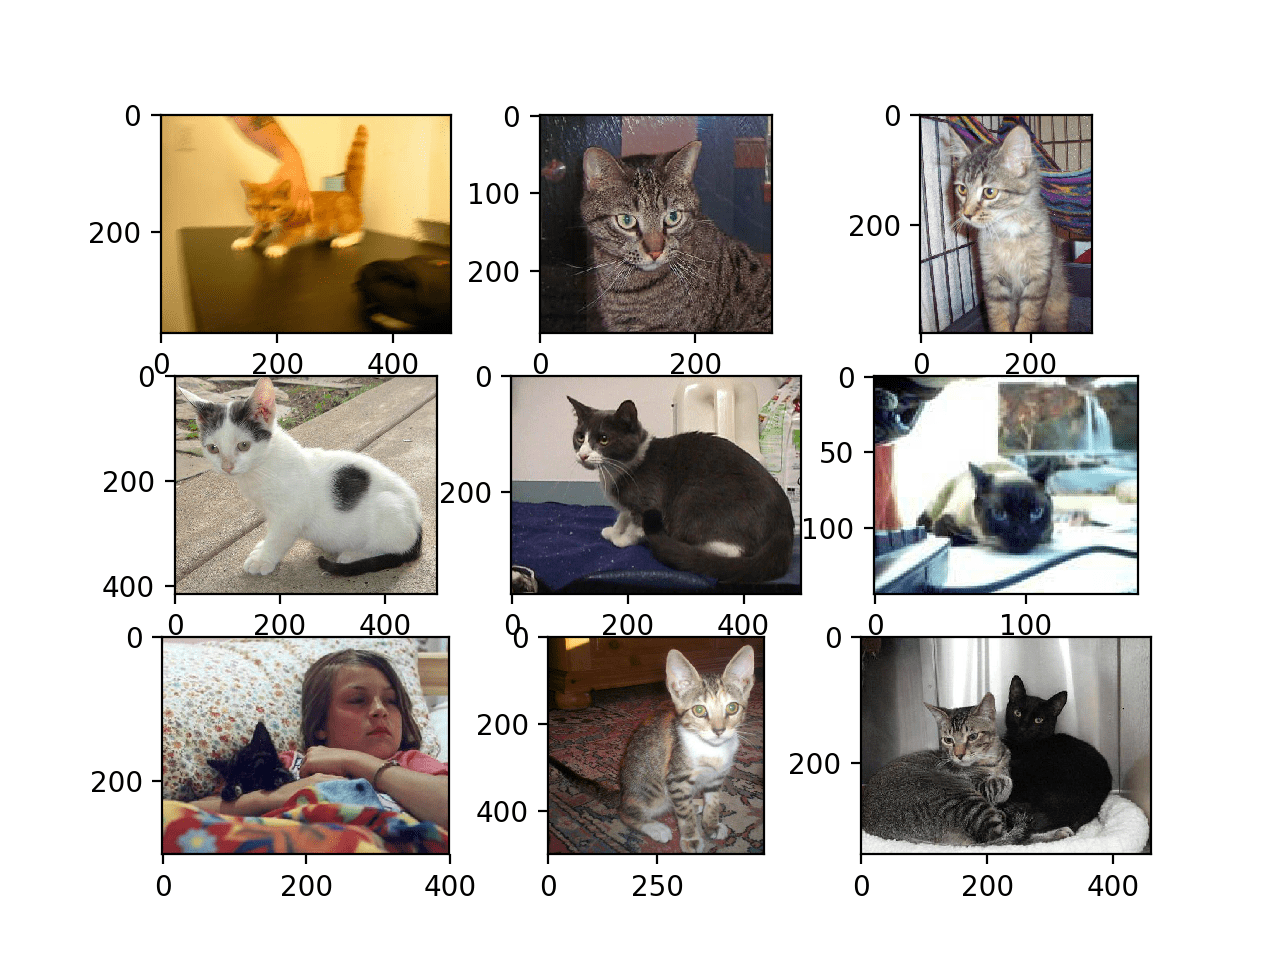 How to Classify Photos of Dogs and Cats (with 97% accuracy)